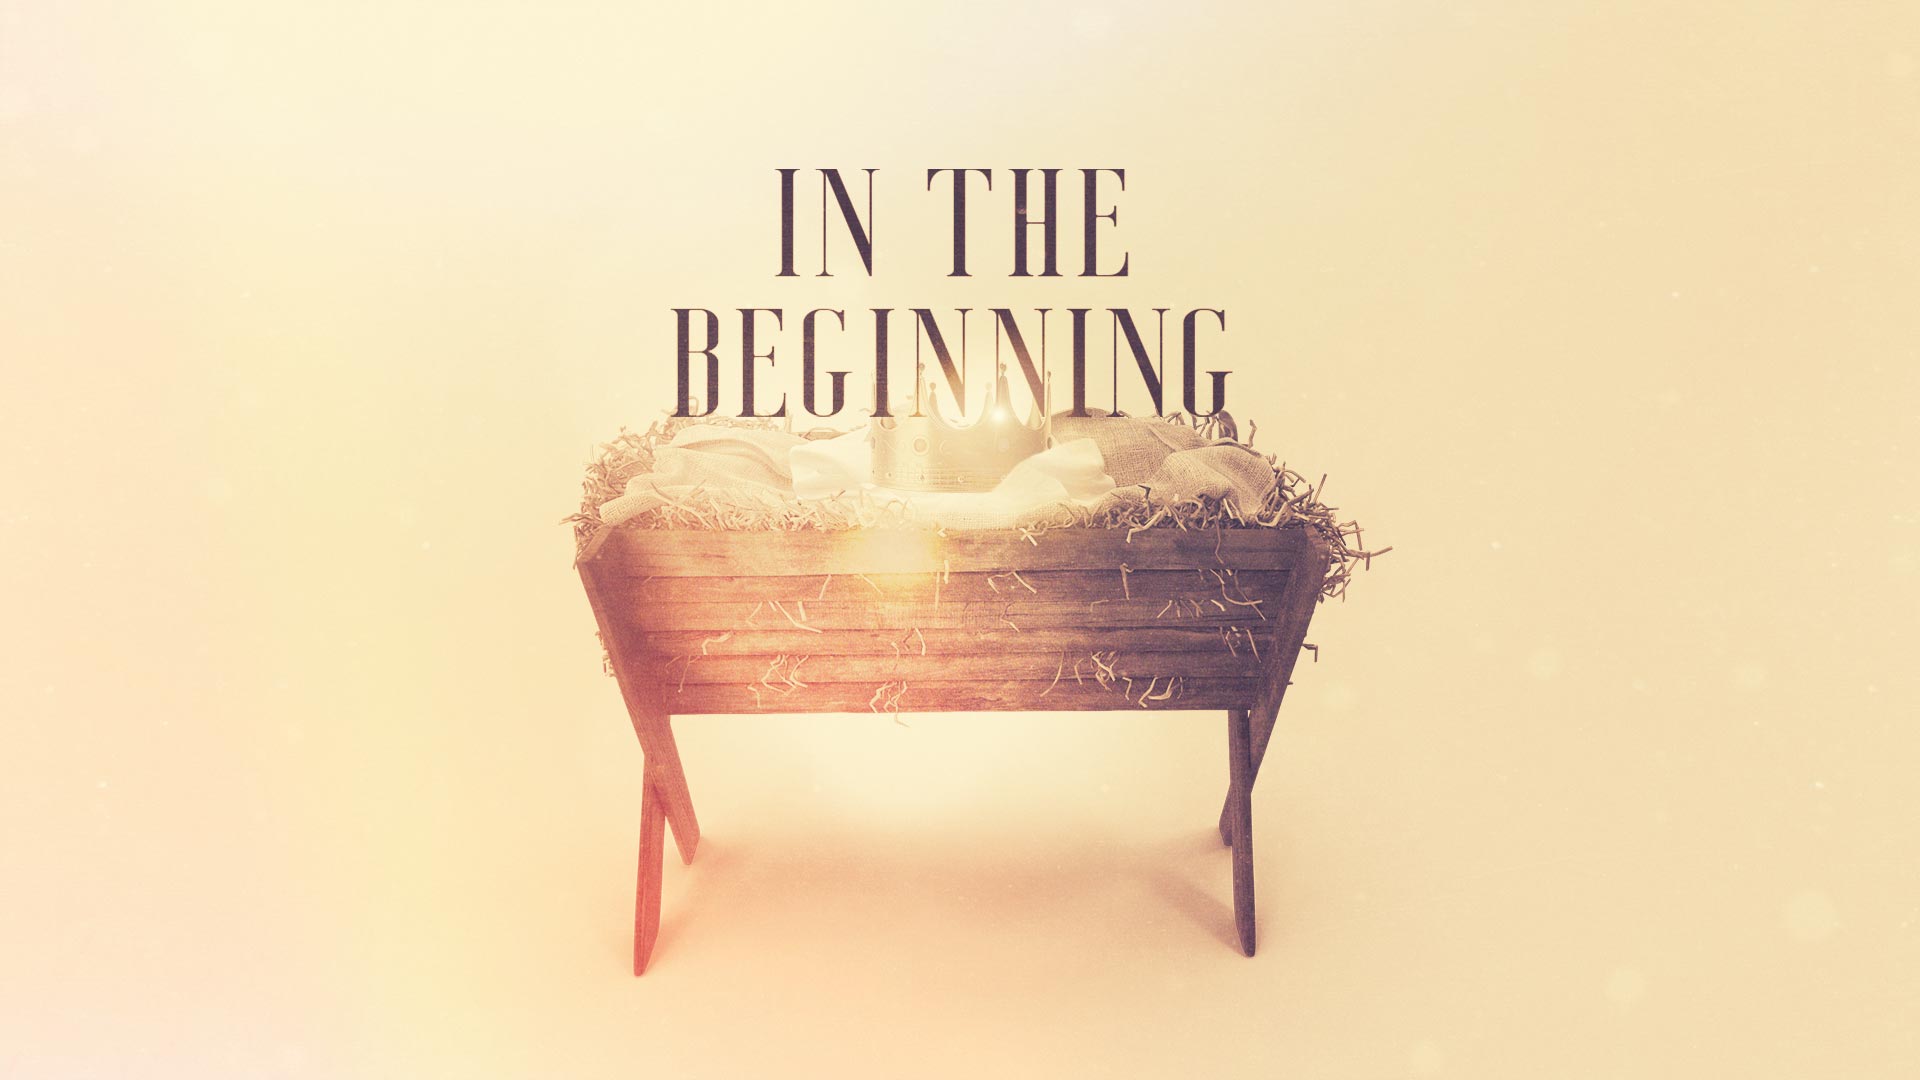 "In The Beginning" Message